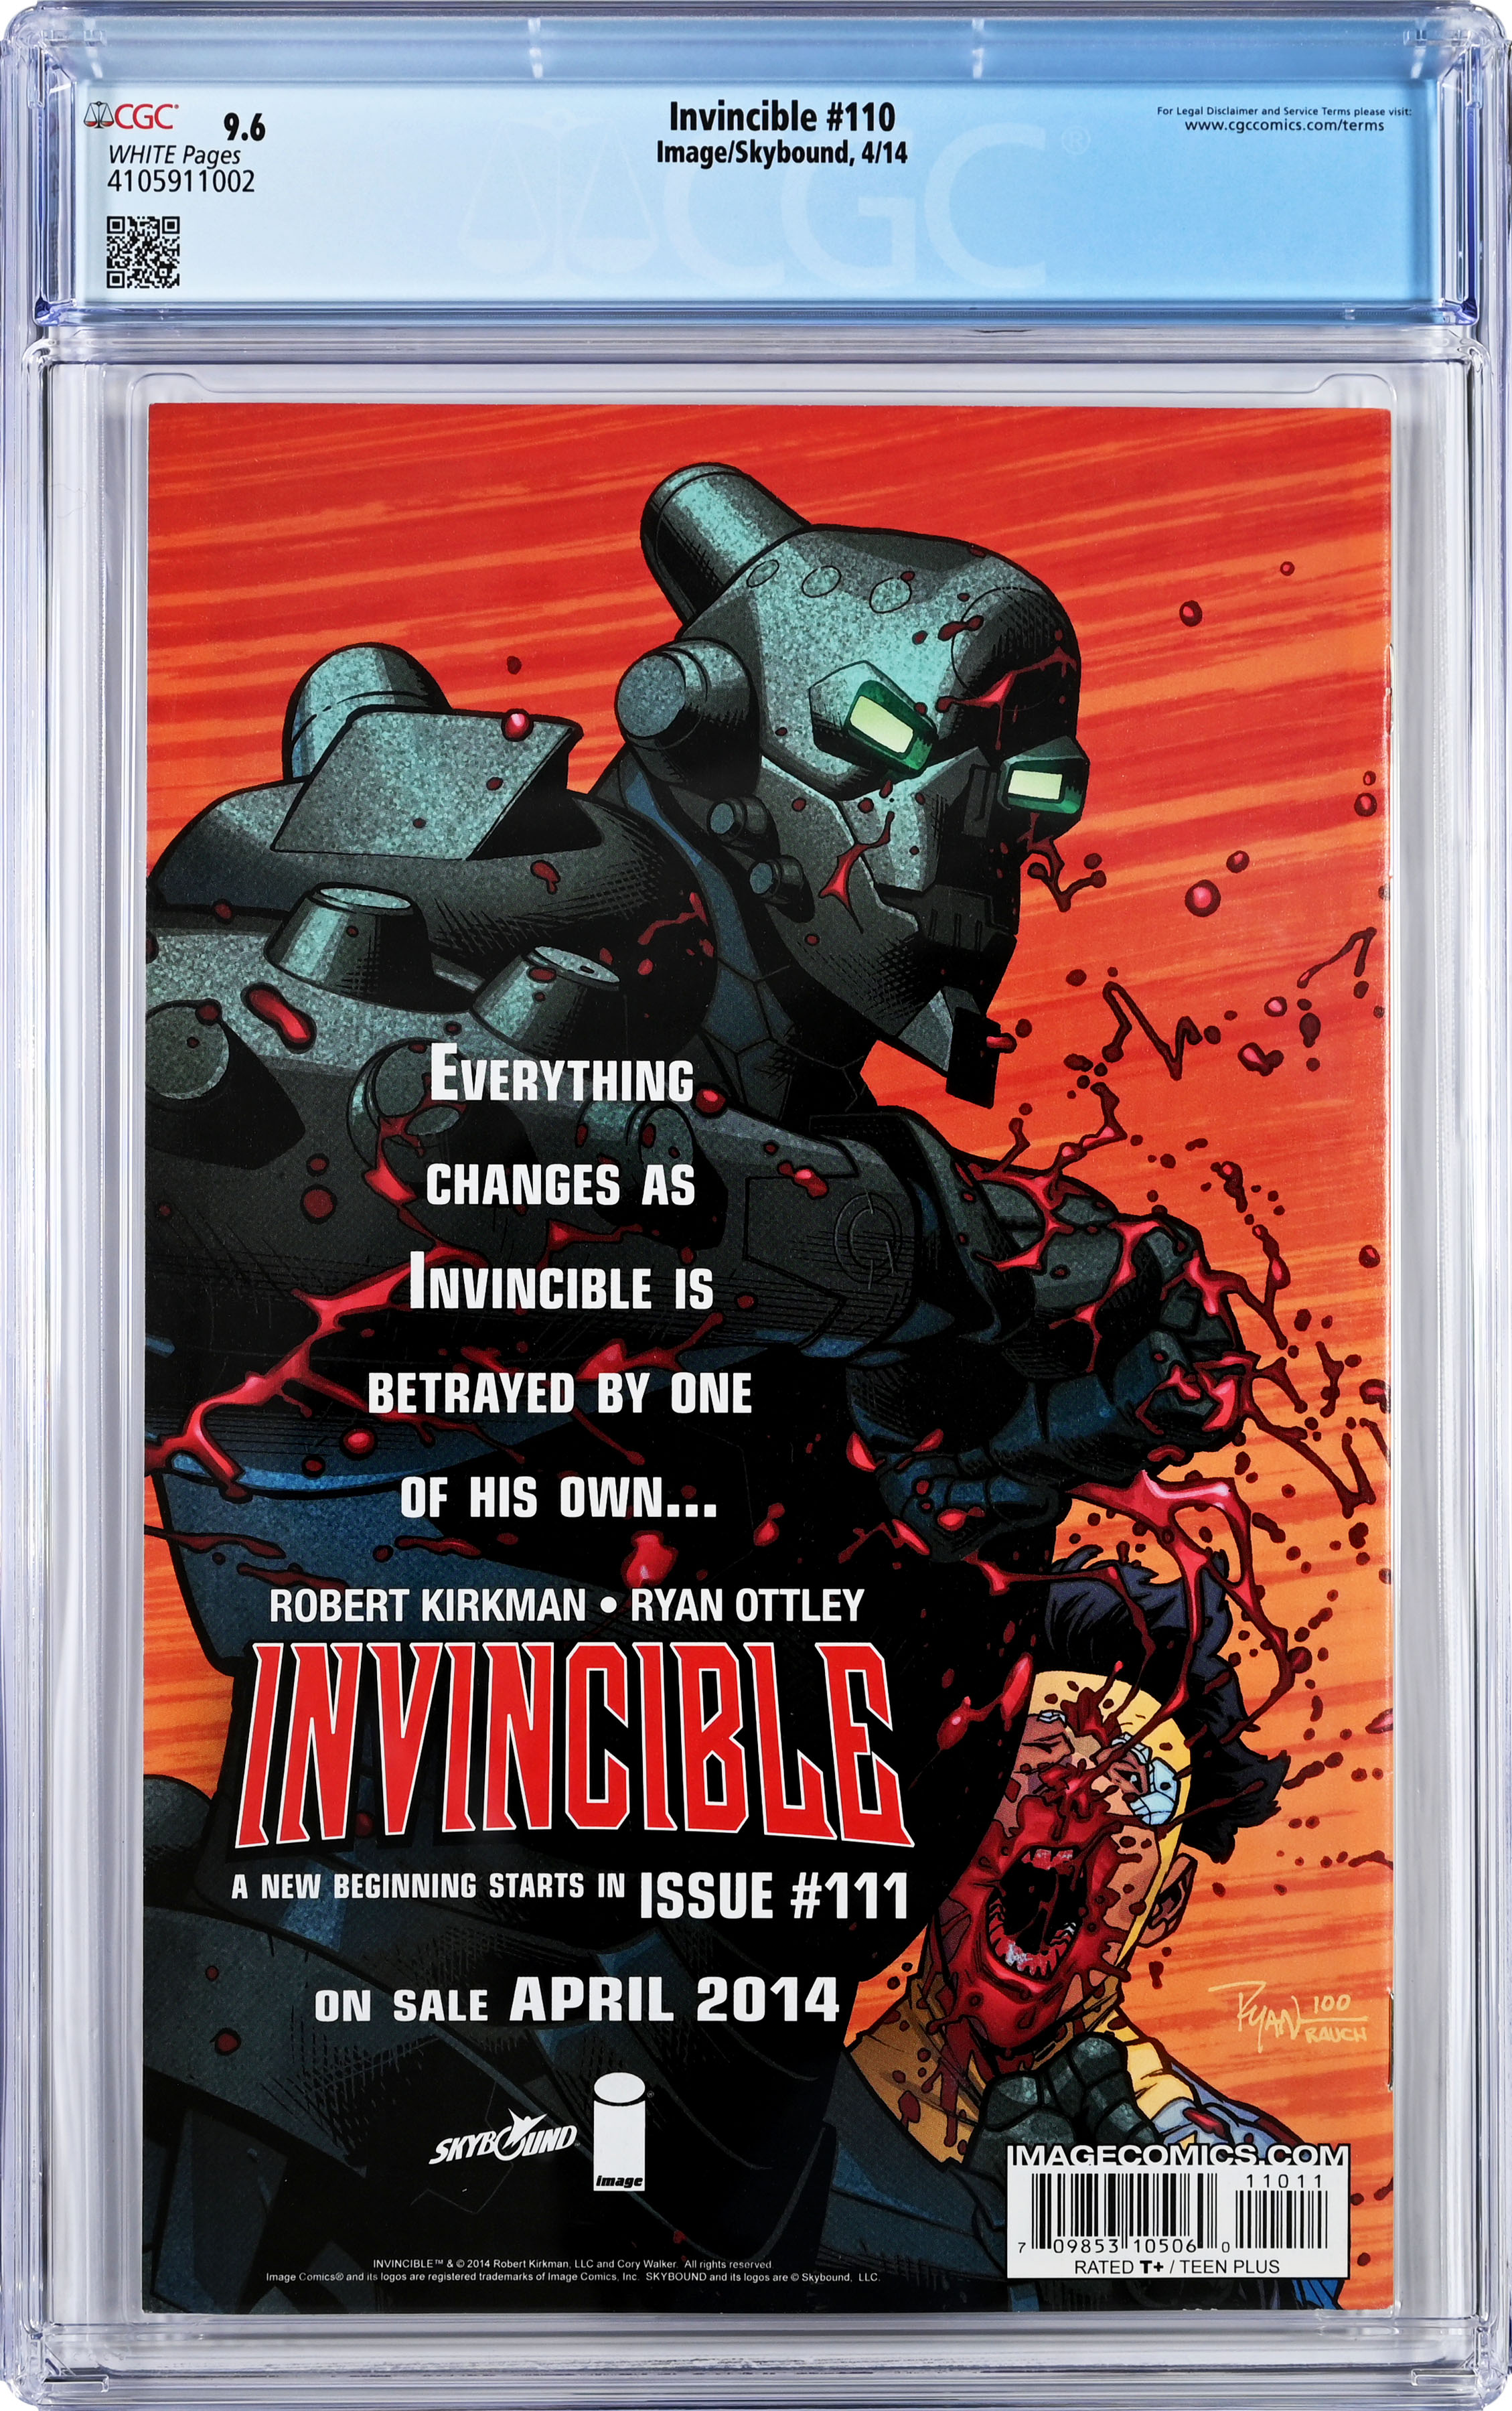 INVINCIBLE #110 Image/Skybound (2014) CONTROVERSIAL ISSUE Kirkman CGC 9.6 NM